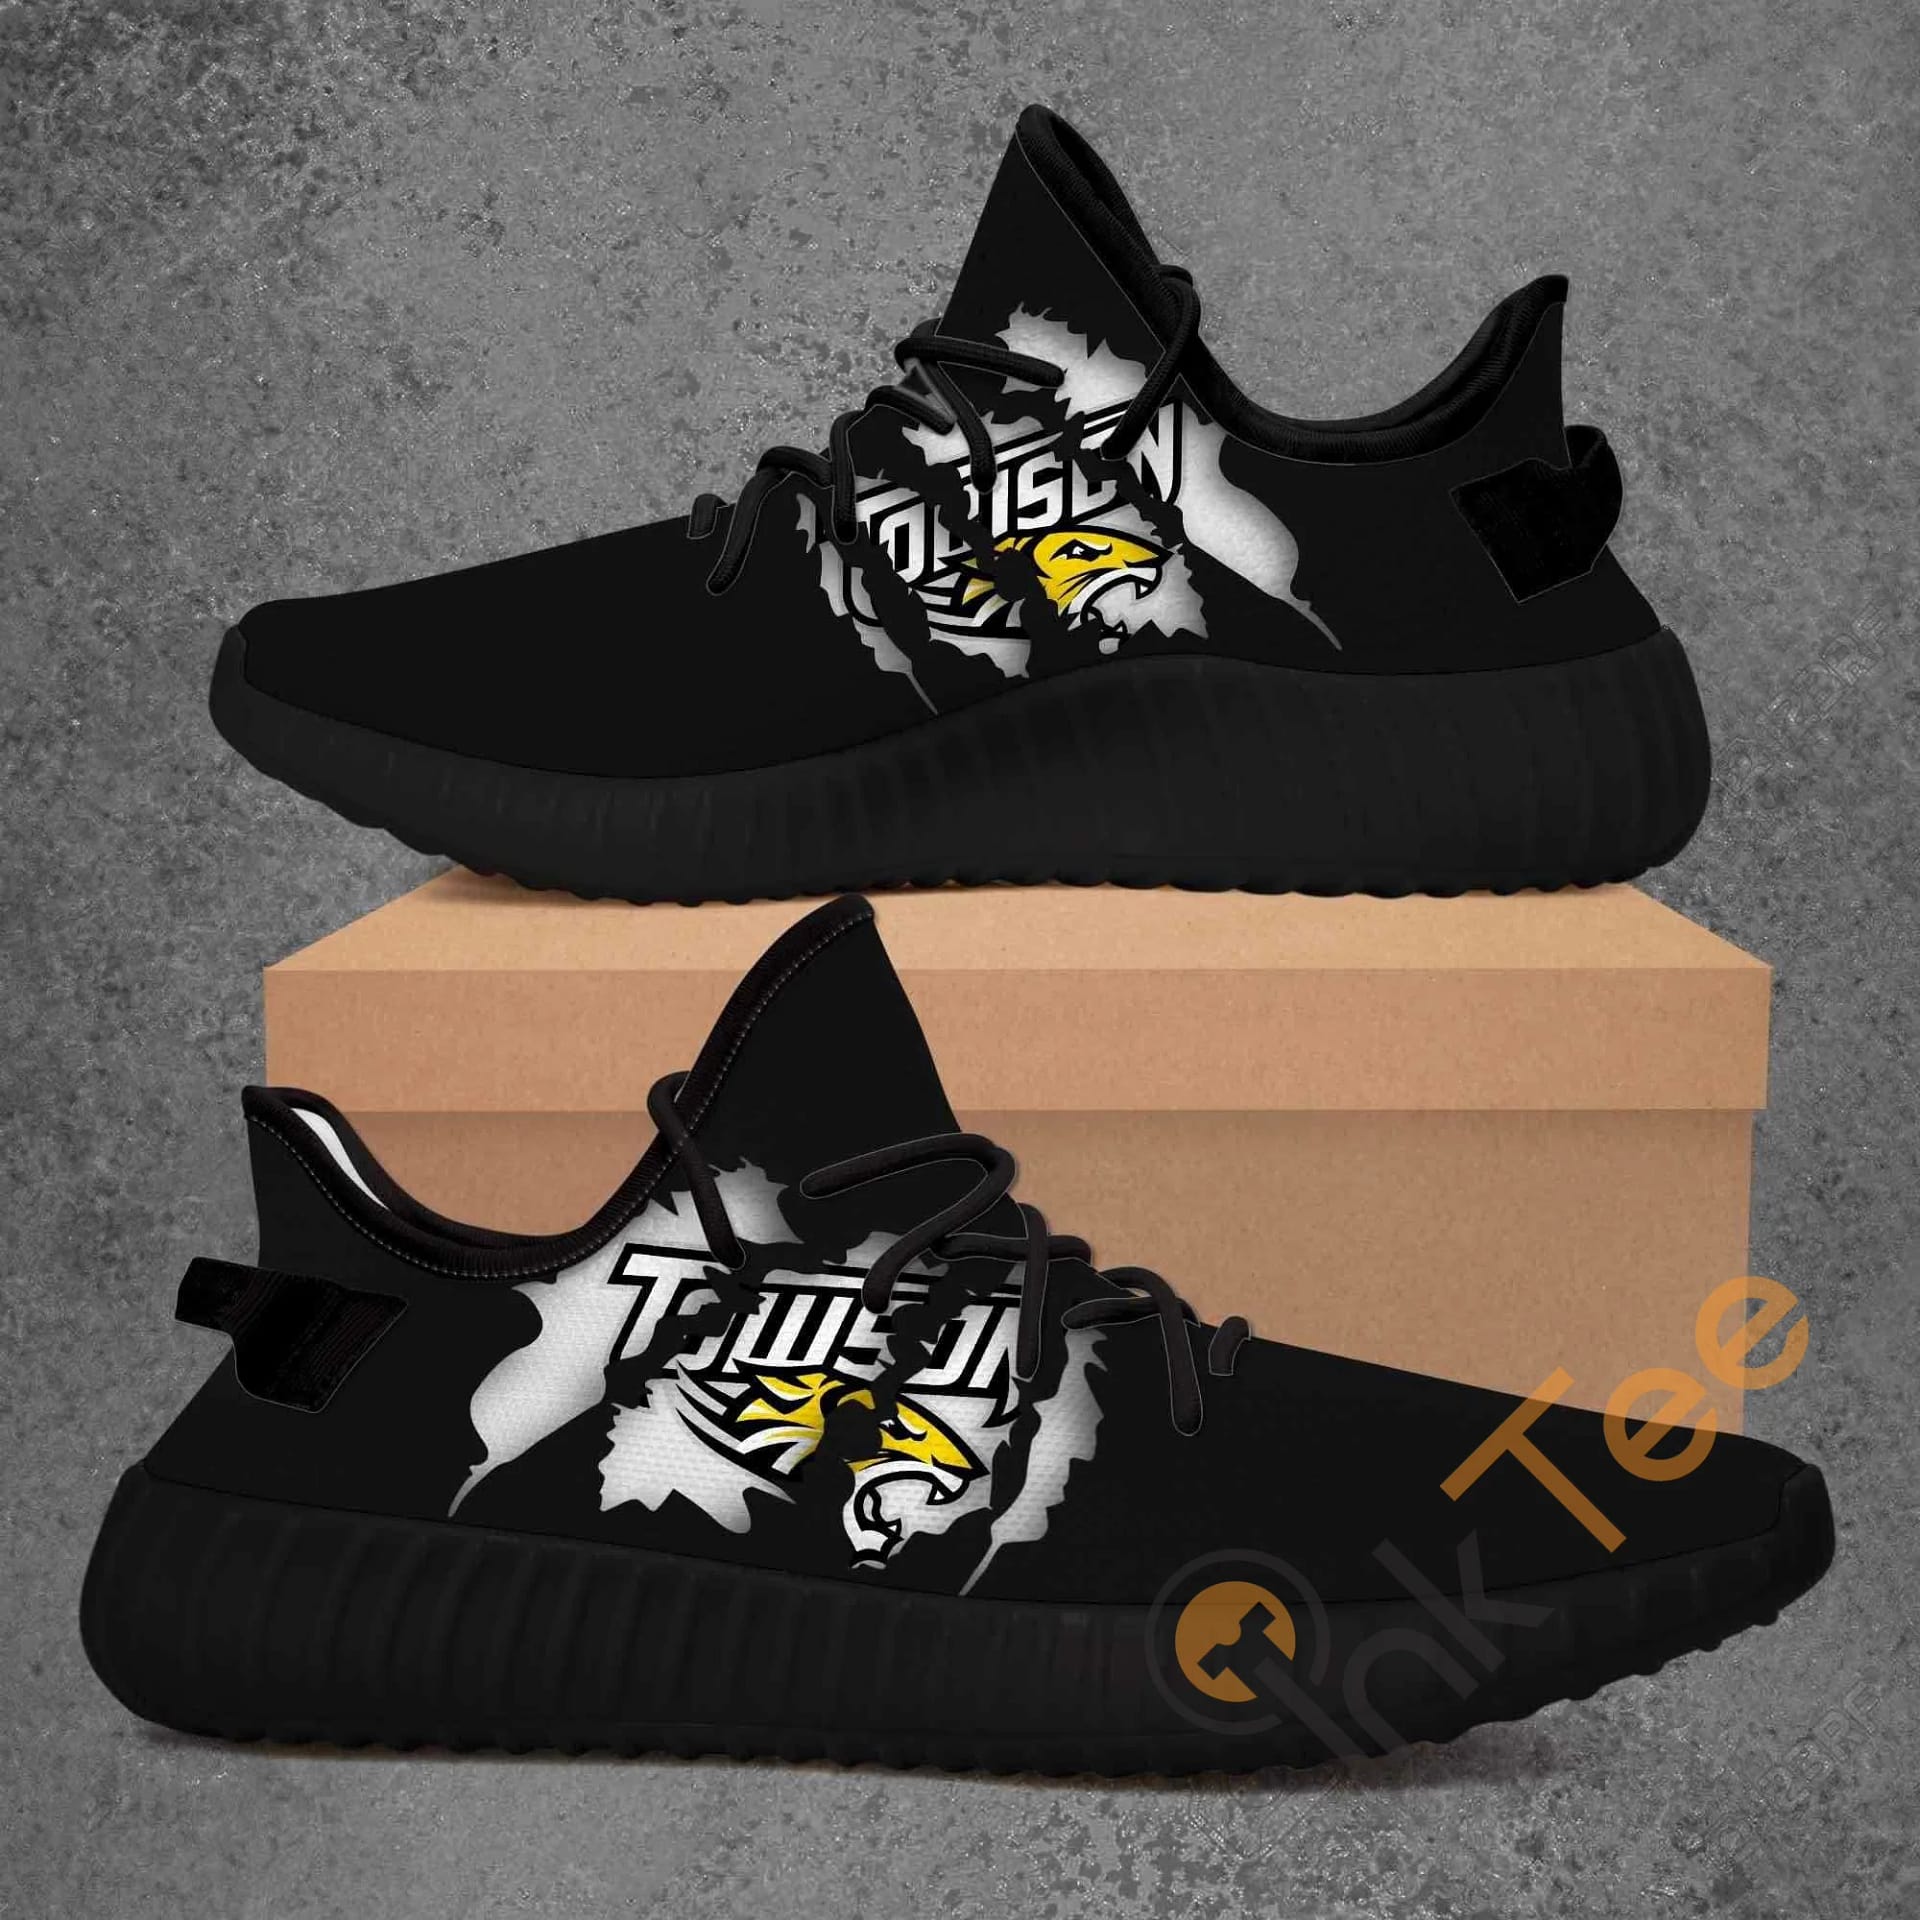 Towson Tigers Ncaa Amazon Best Selling Yeezy Boost